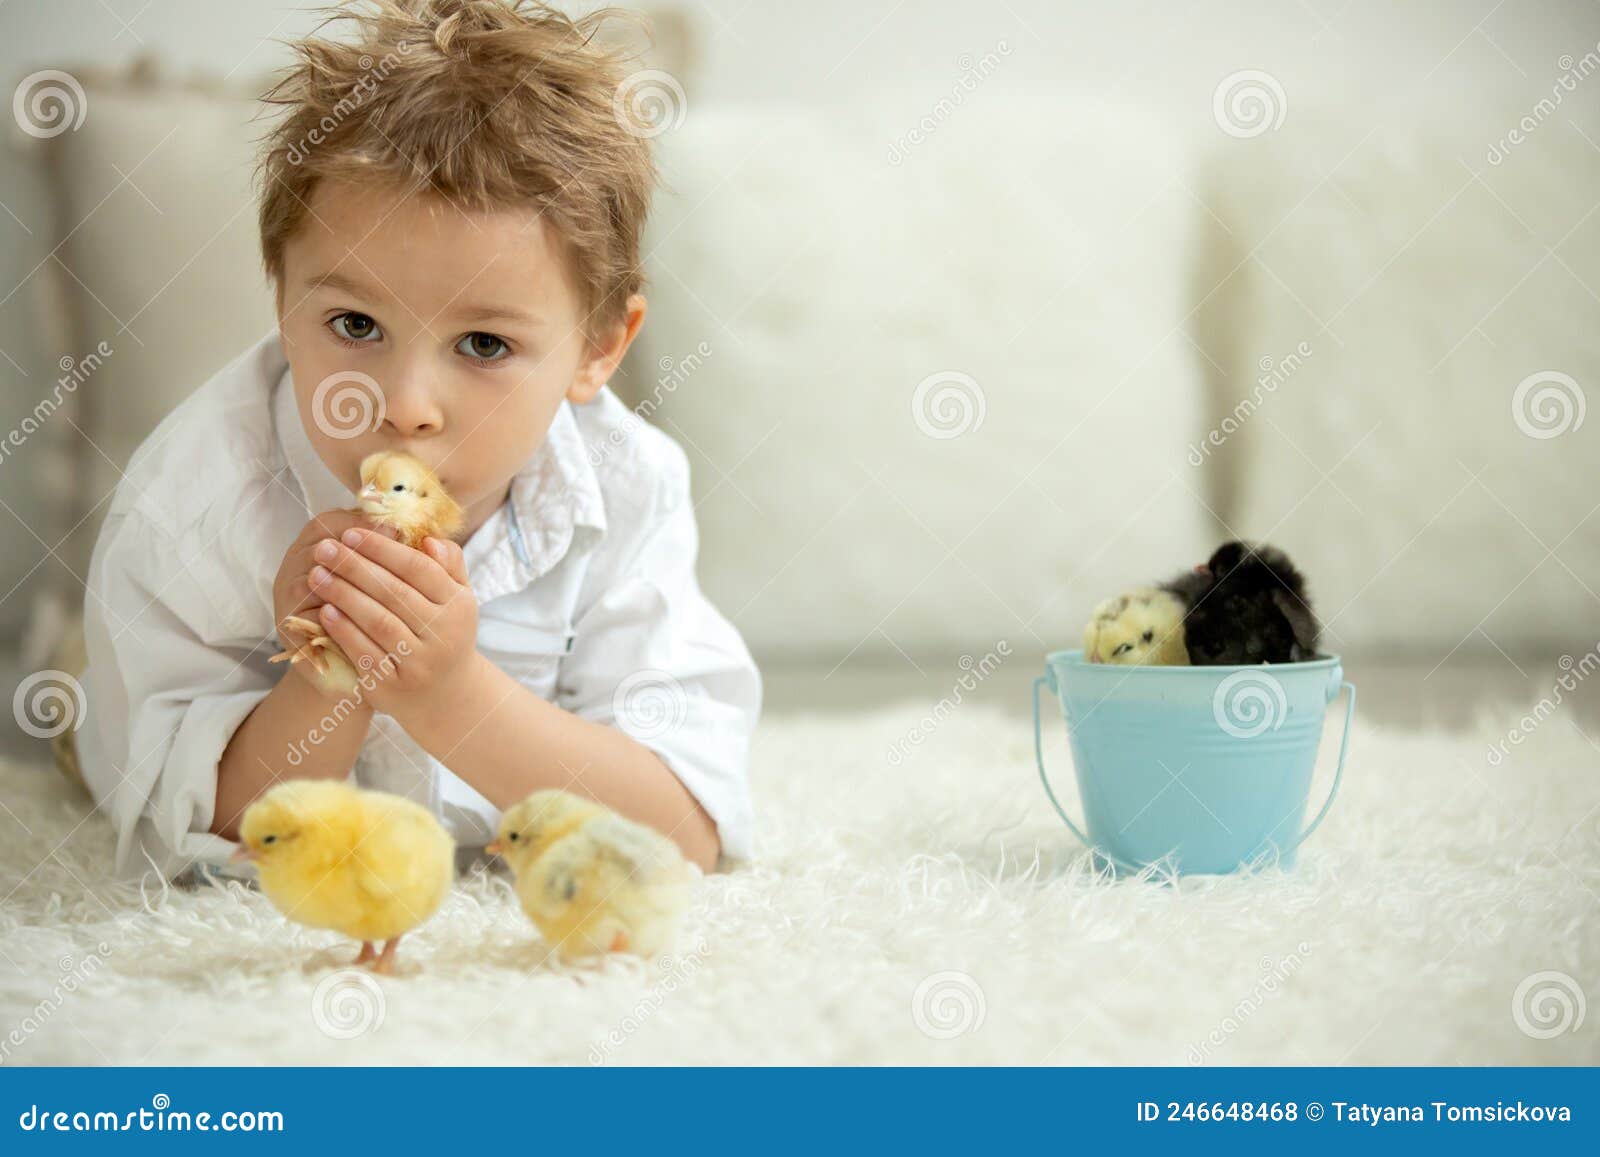 Cute Child at Home with Little Newborn Chicks, Enjoying, Cute Kid and ...